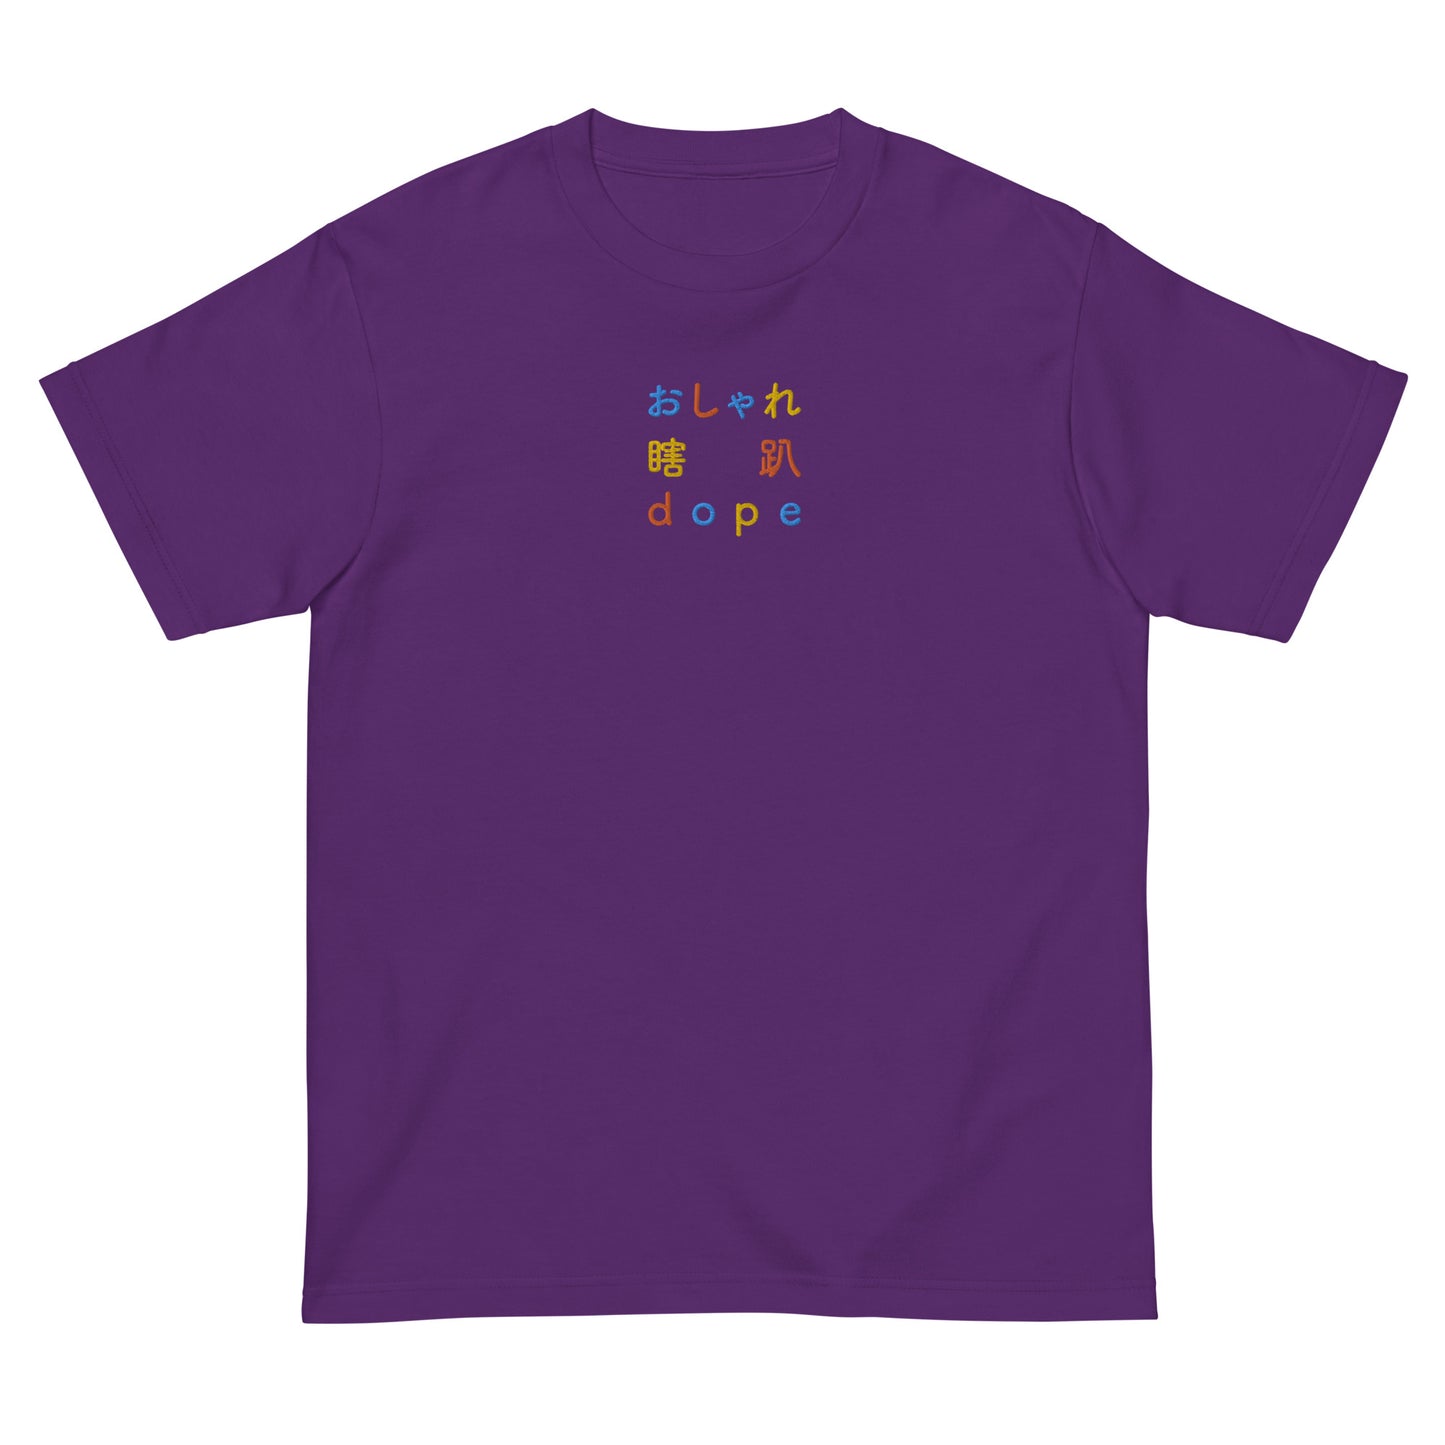 Purple High Quality Tee - Front Design with an Blue, Orange, Yellow Embroidery "Dope" in Japanese,Chinese and English